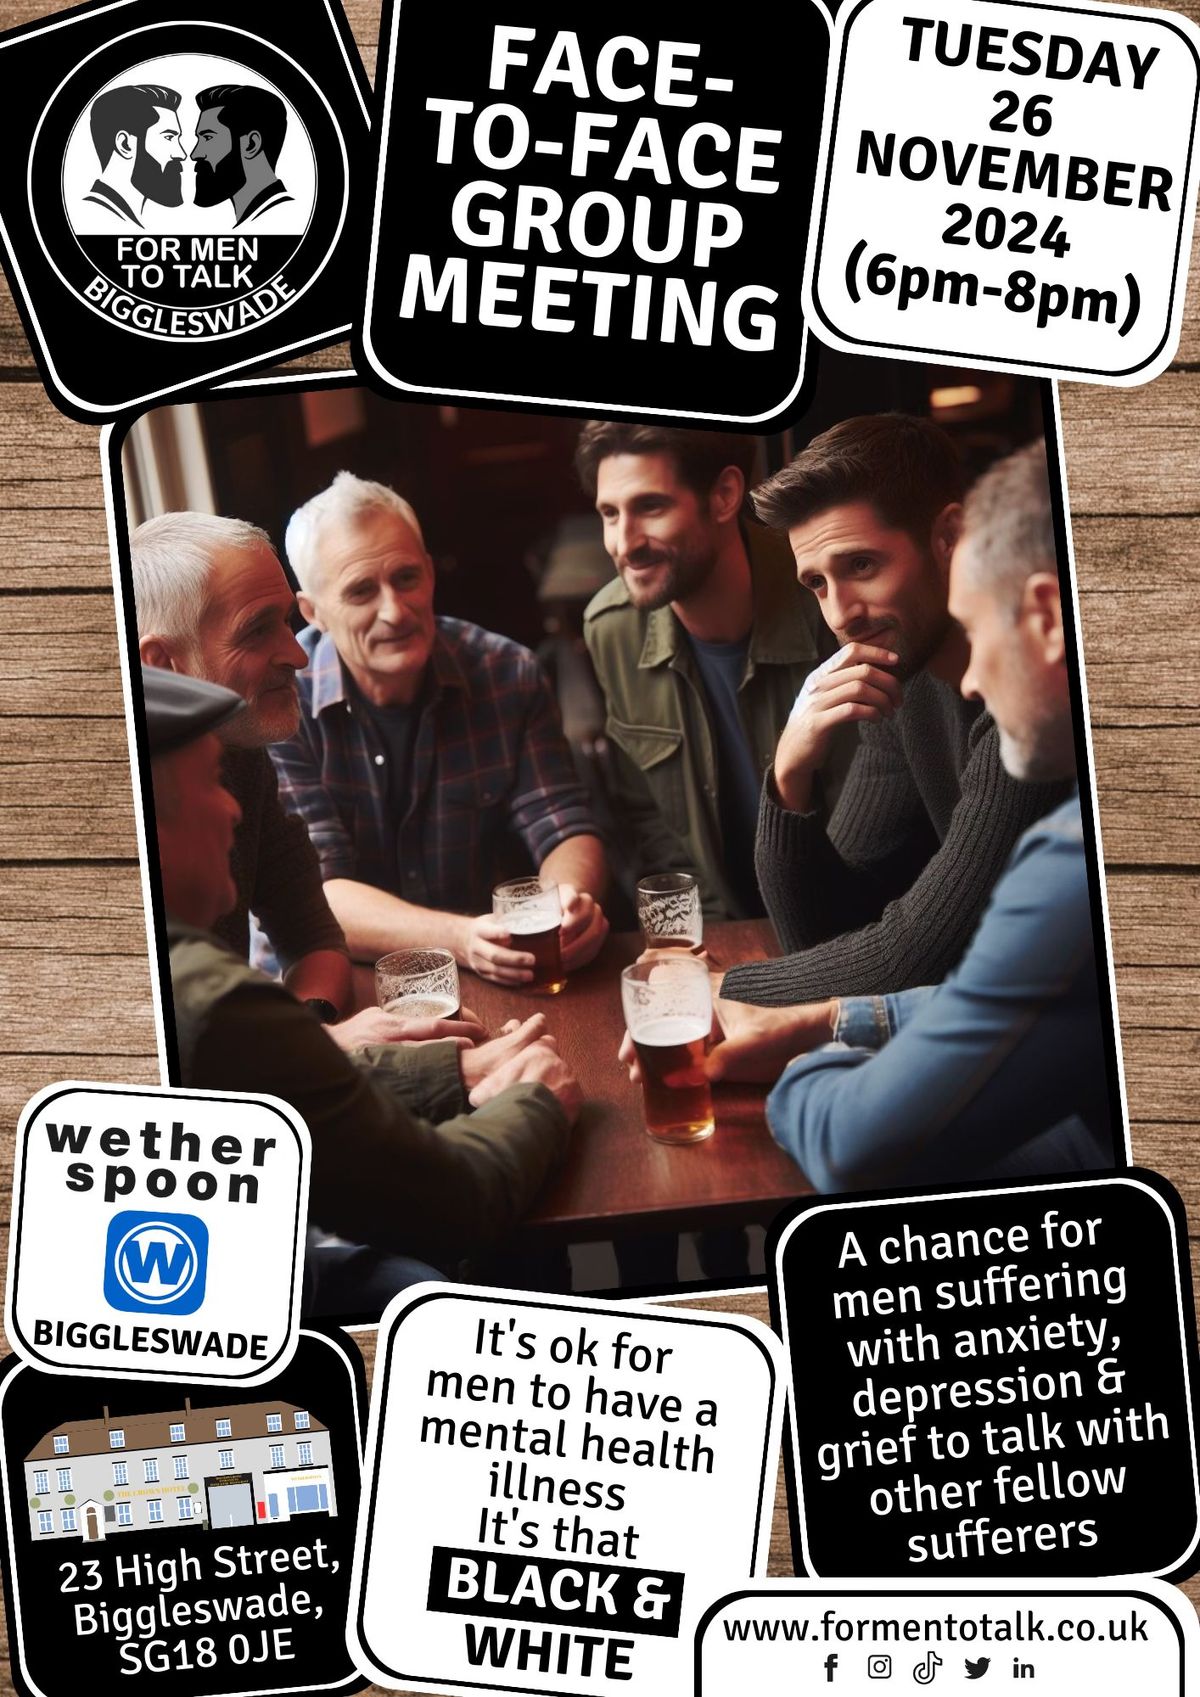 'For Men To Talk' Face-to-Face Group Meeting (Biggleswade)